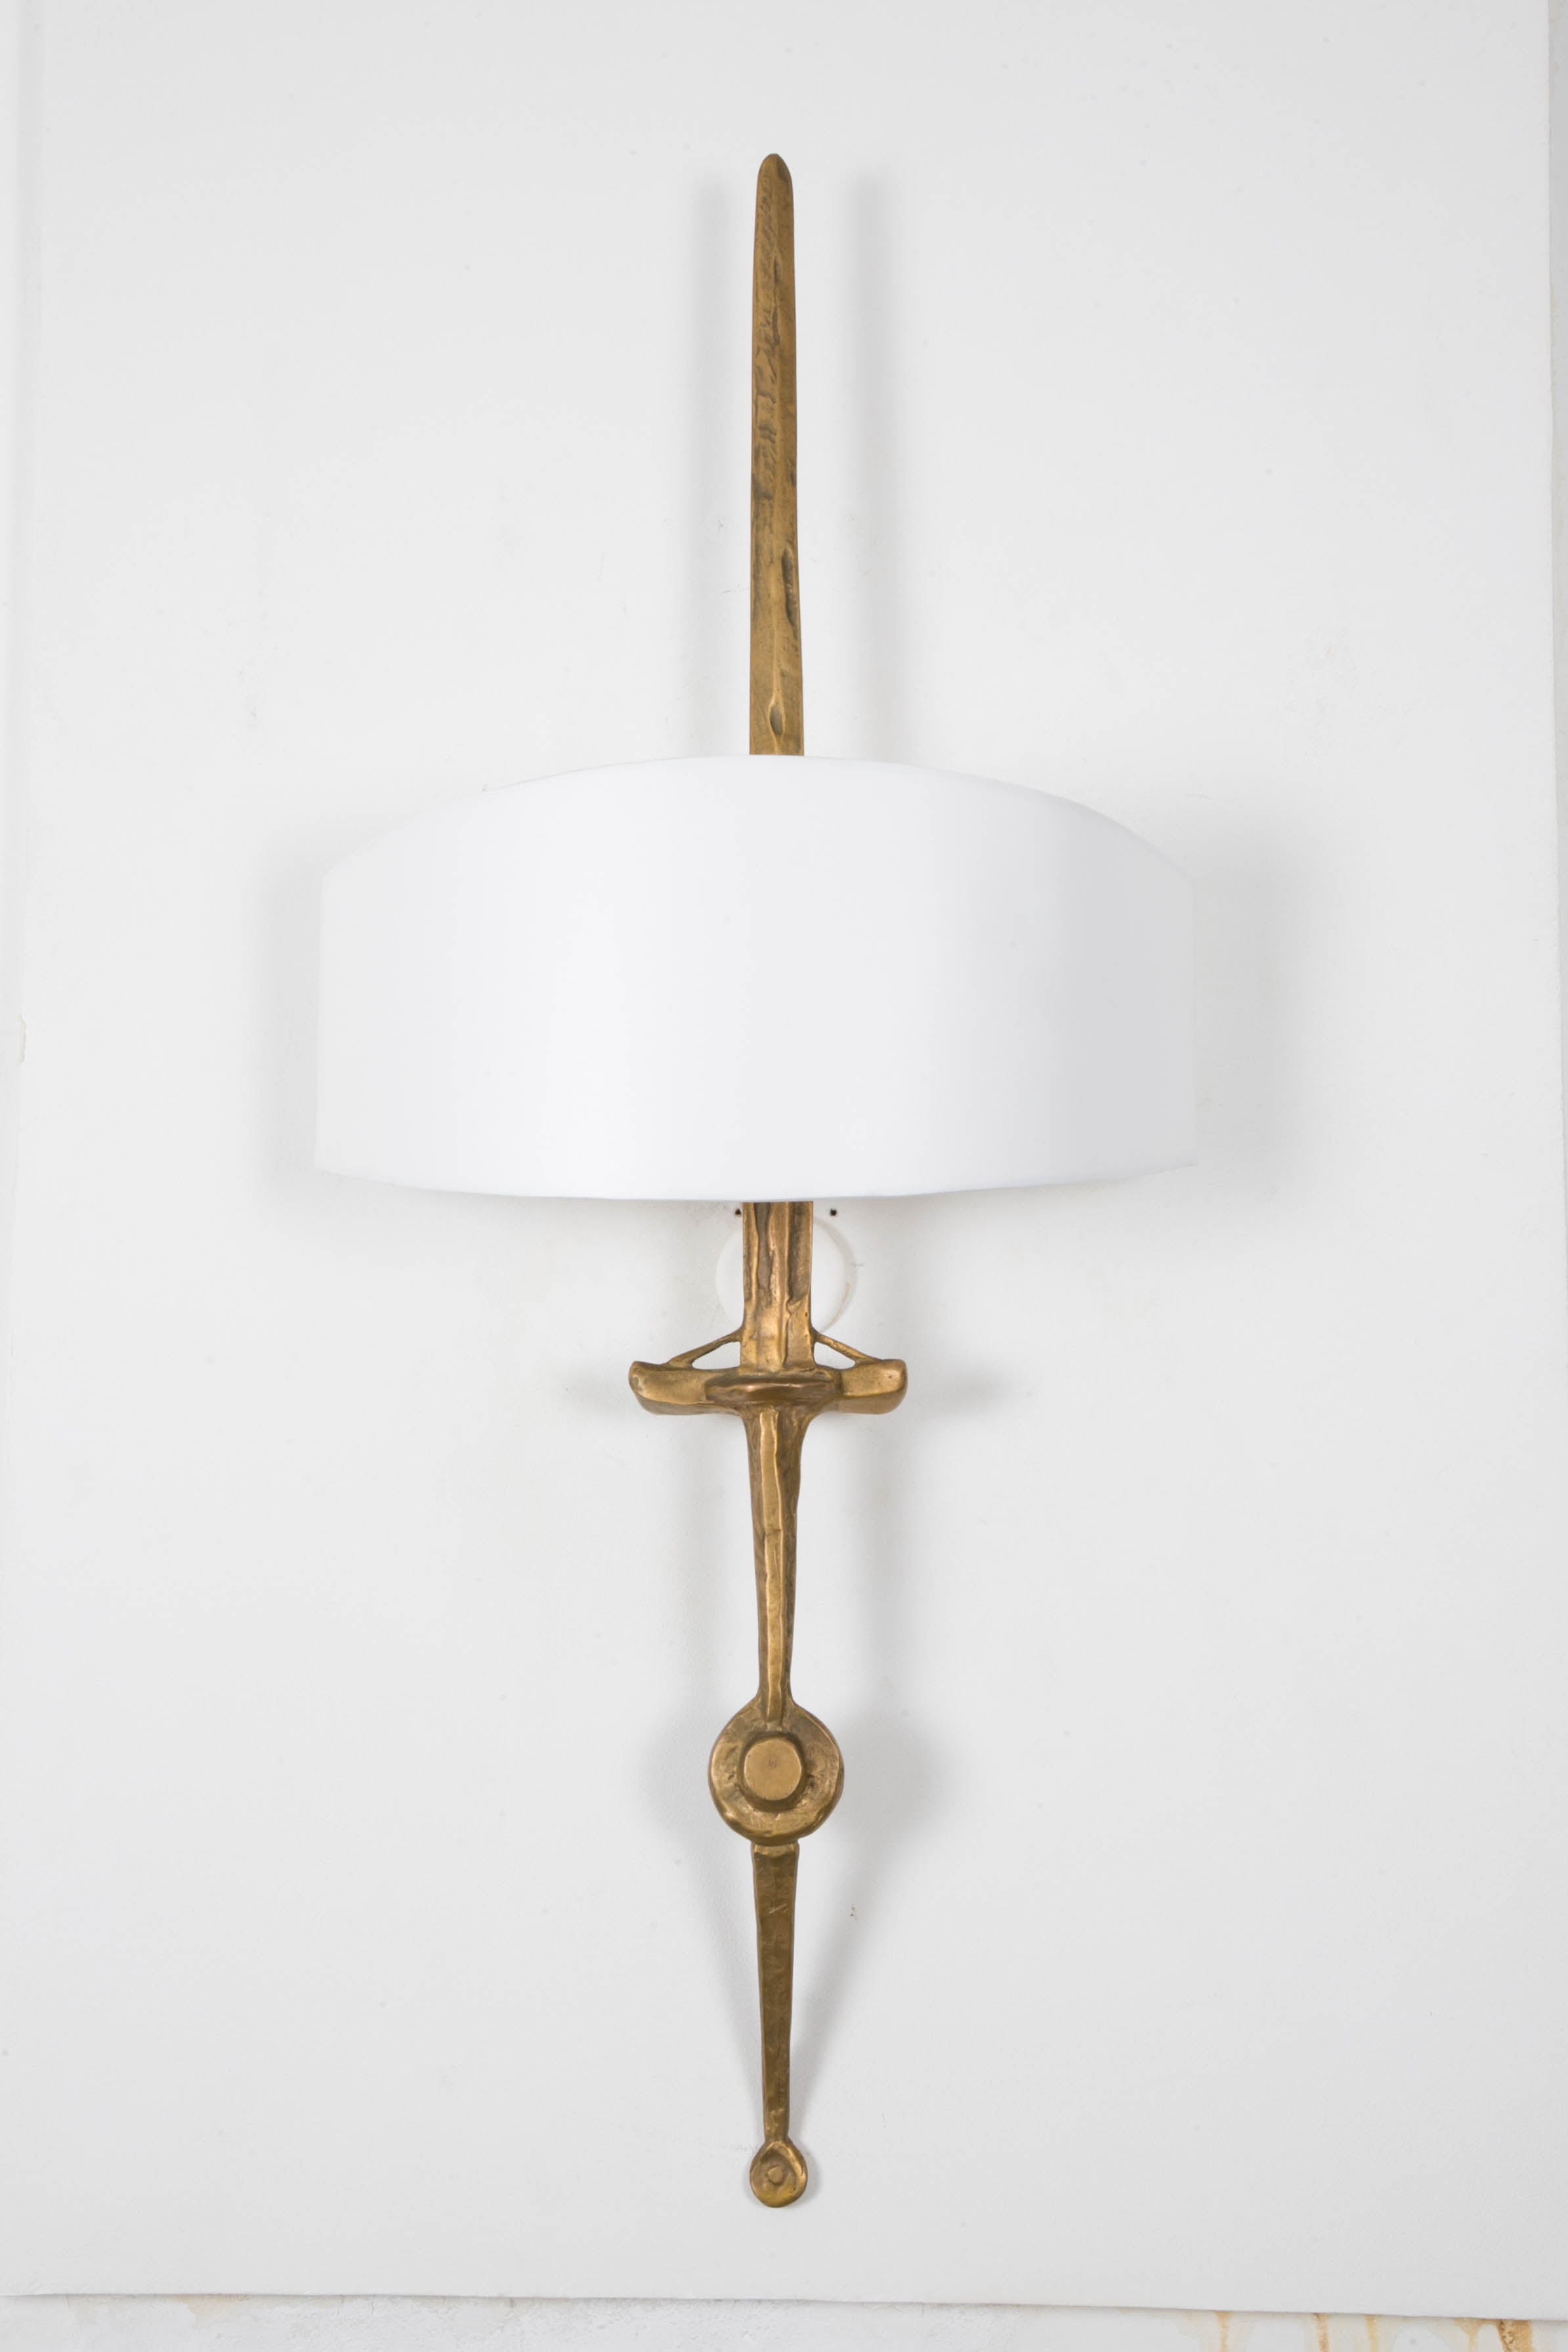 Pair of Gilt Bronze Wall Lights Called "Sword, " 1958-1960 by F. Agostini